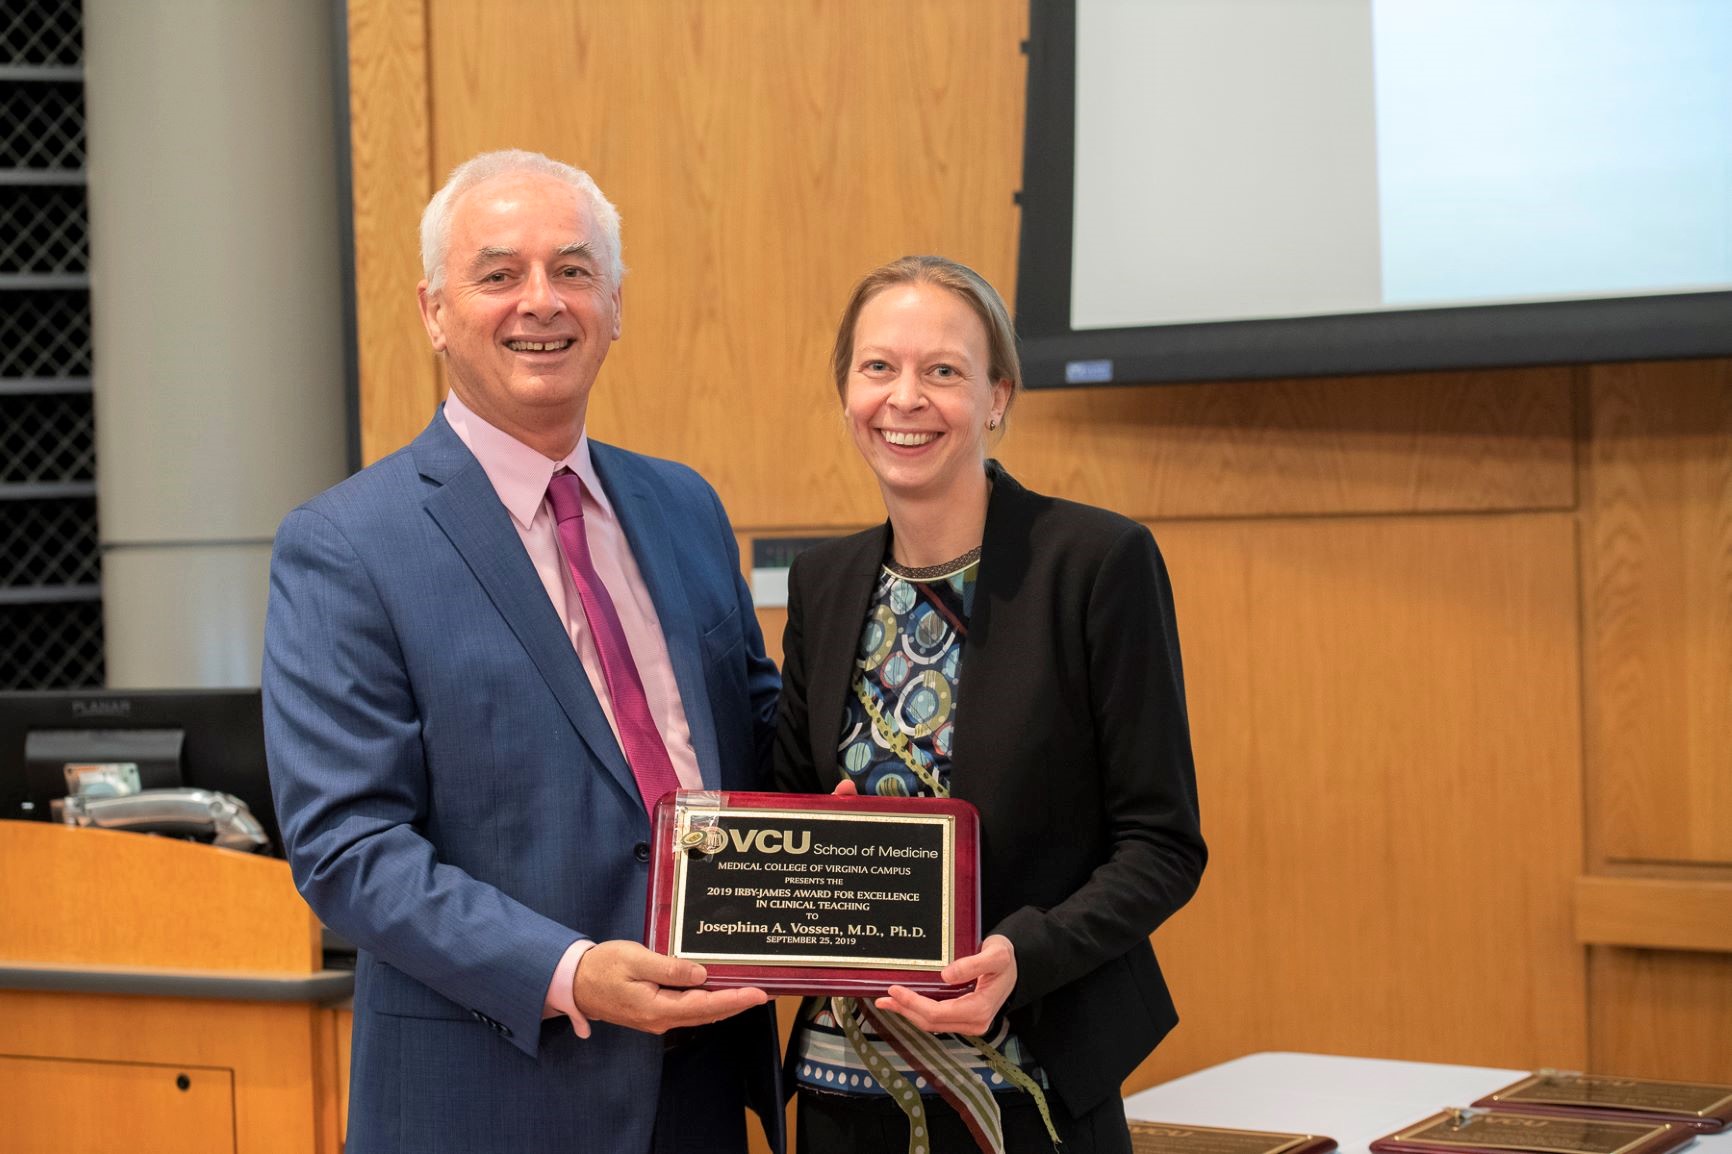 Irby-James Award for Excellence in Clinical Teaching